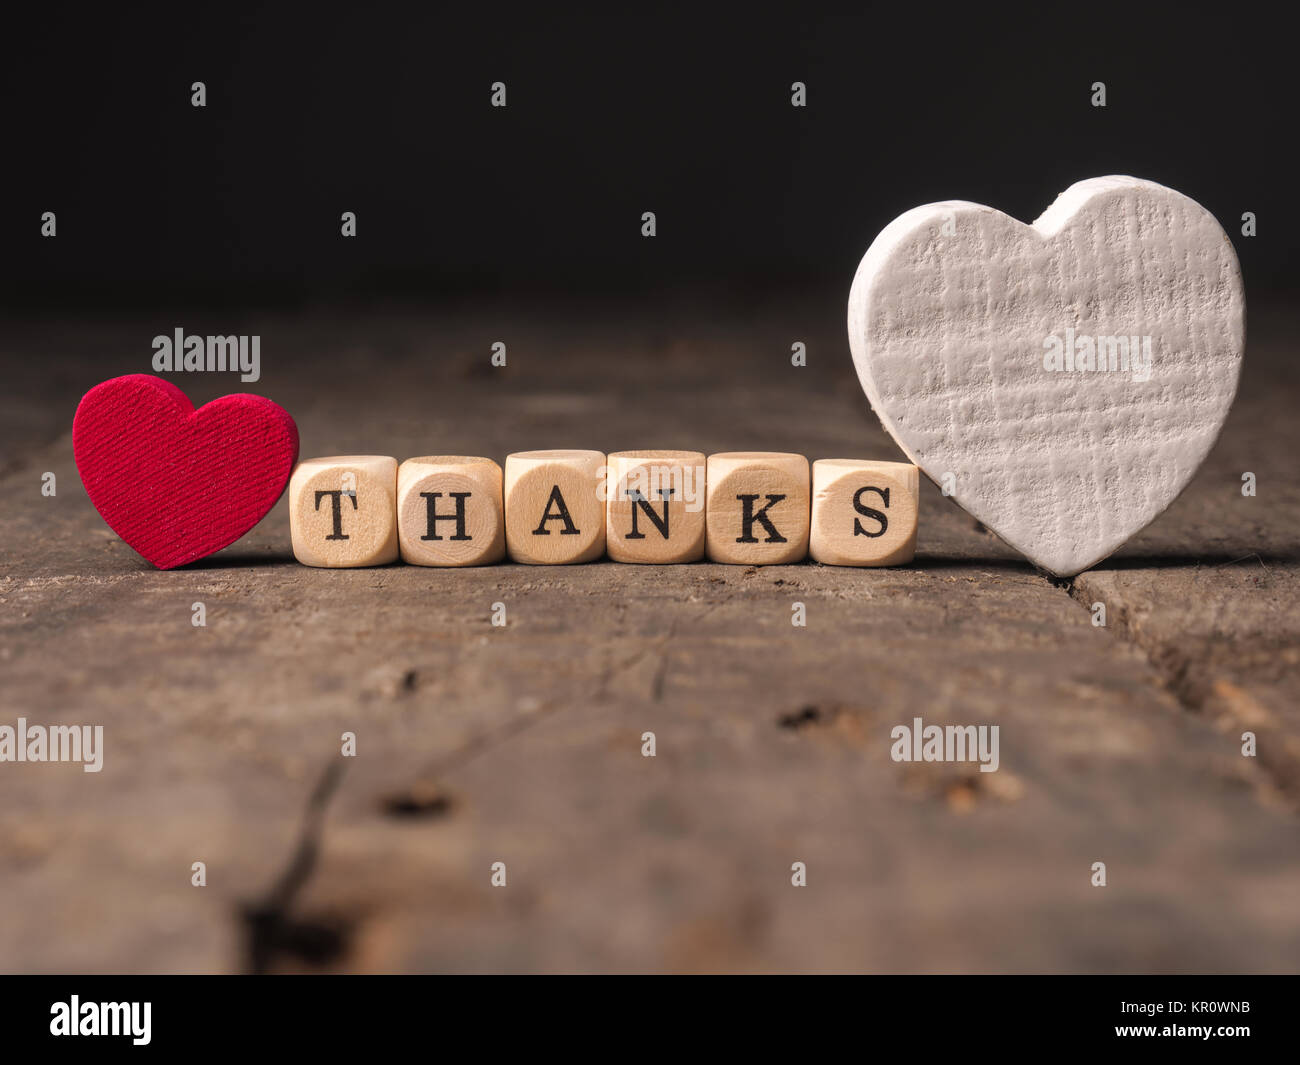 thanks with two heart shapes Stock Photo